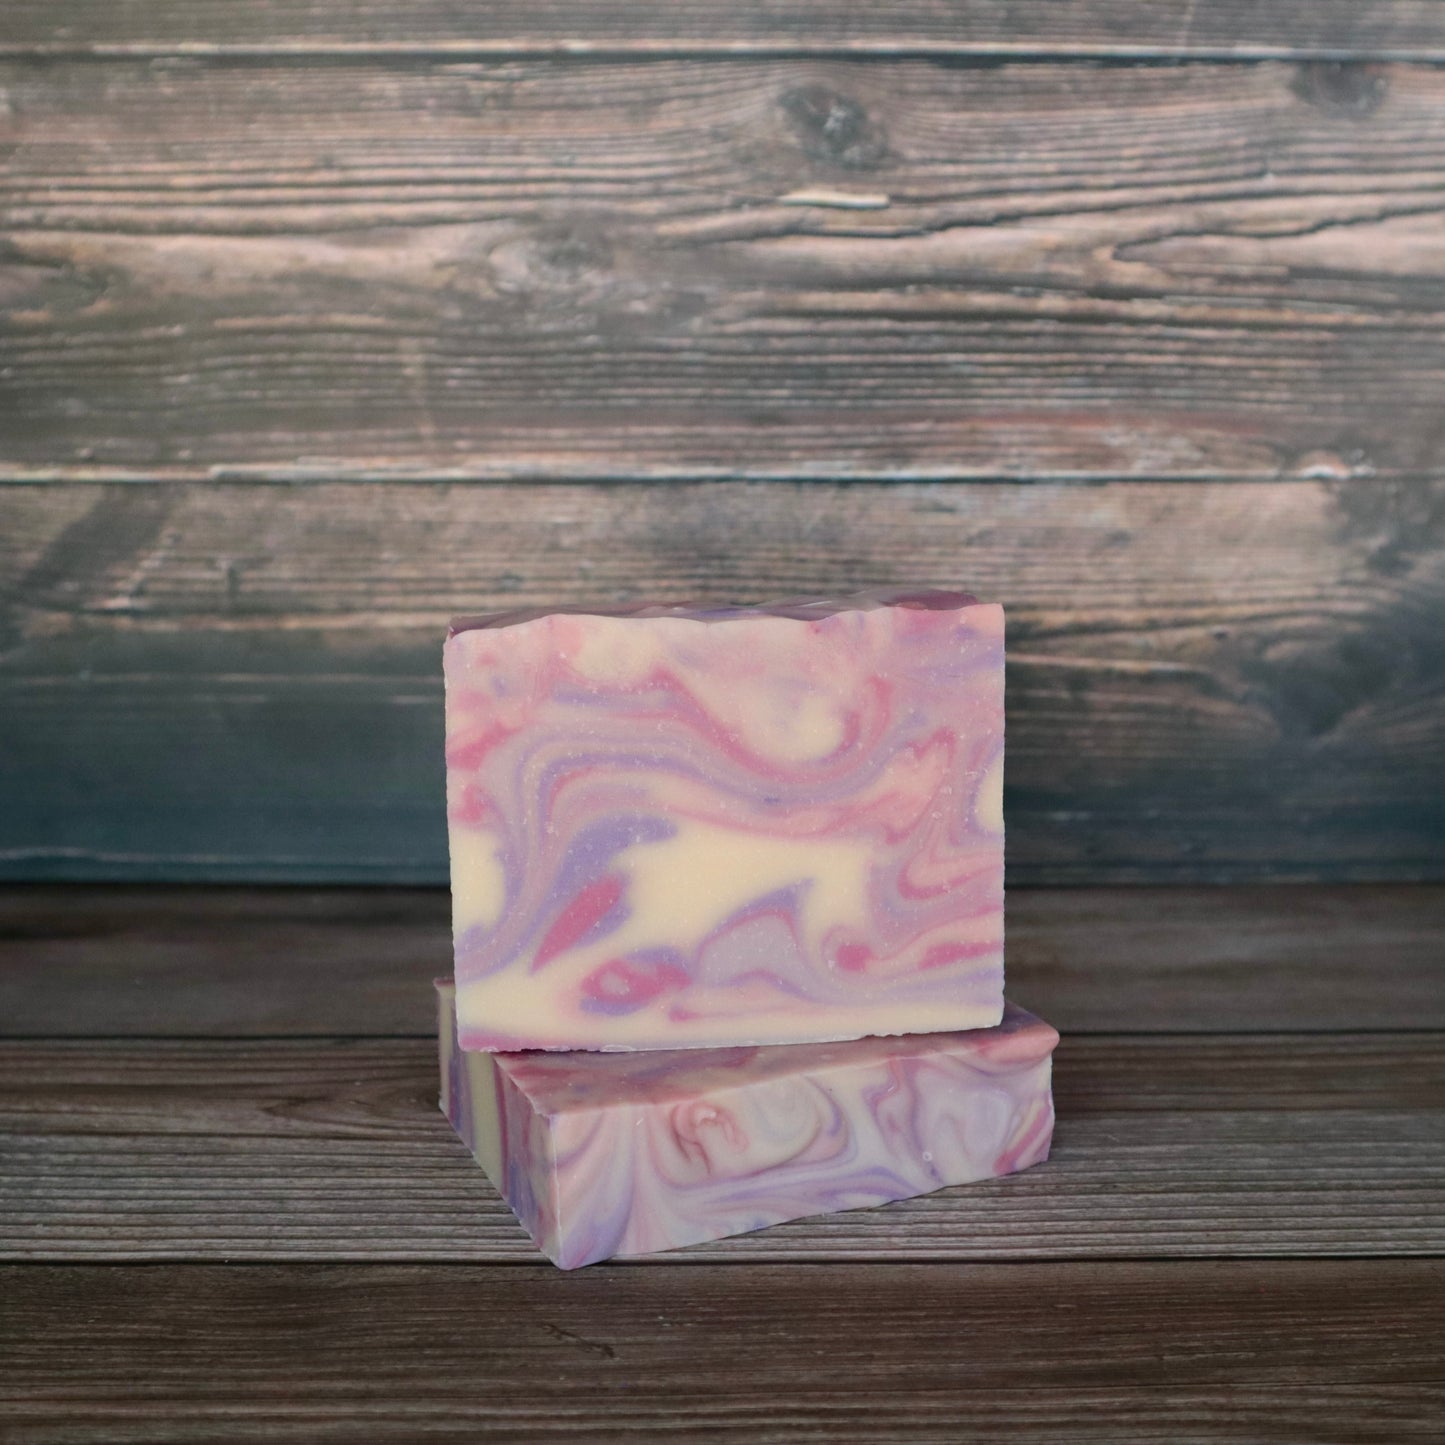 Two bars of soap colored pink, purple and white swirled together to represent berry colors.